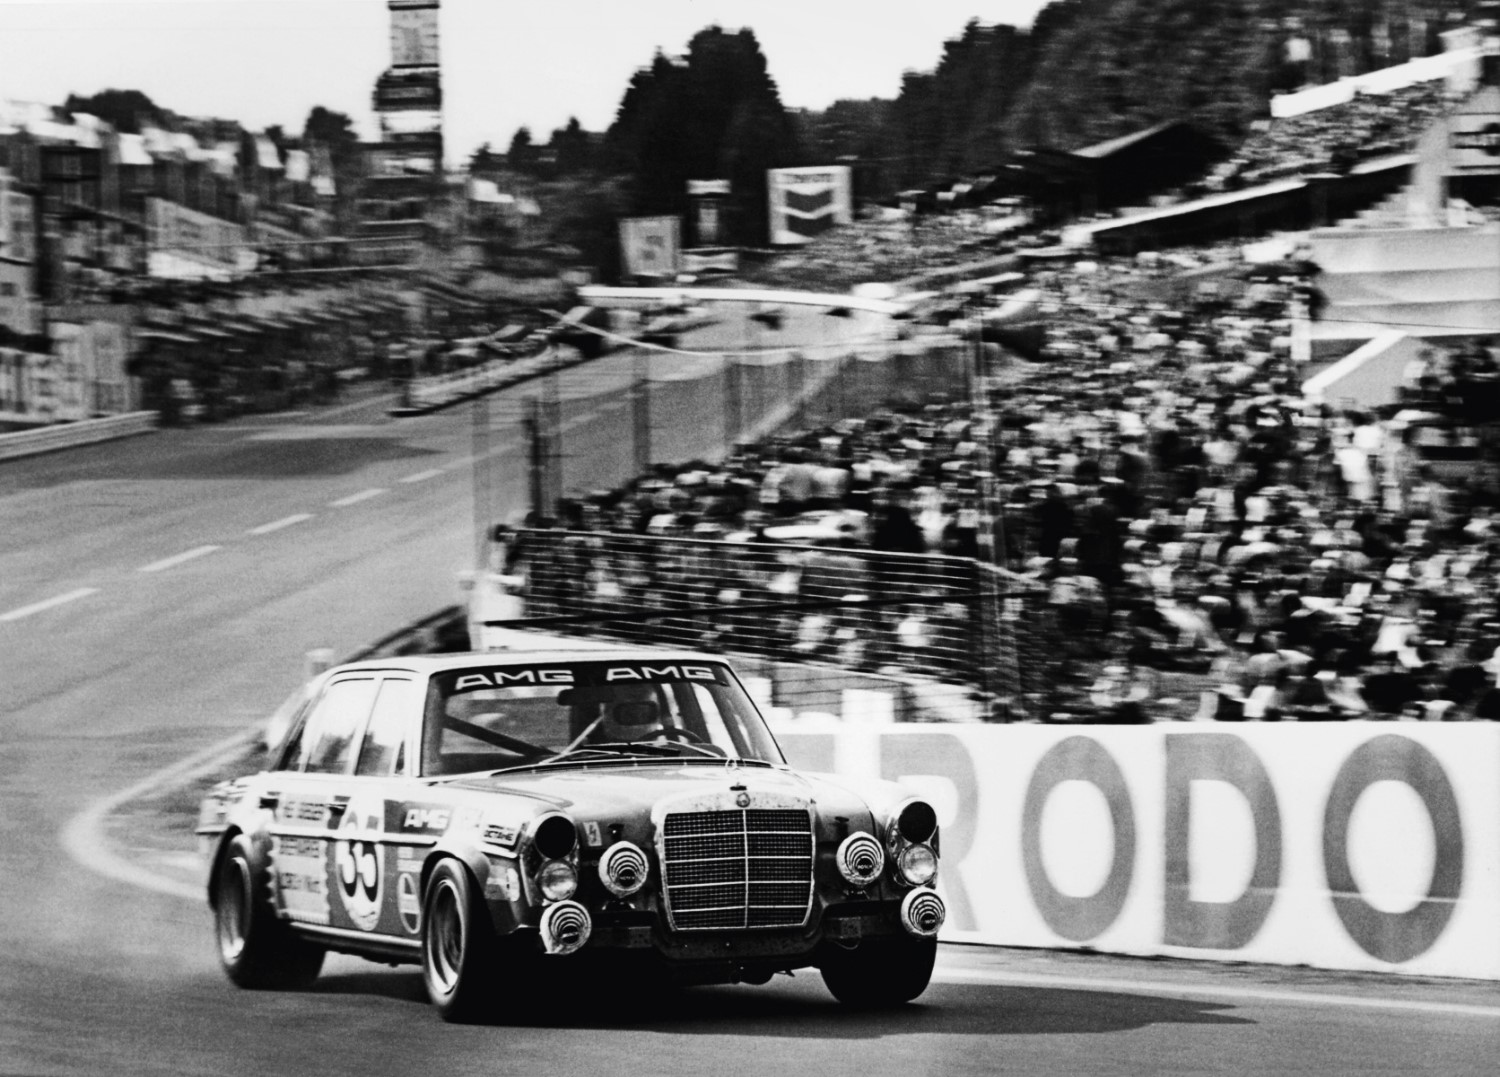 The AMG 300 SEL 6.8 at the 24-hour race in Spa-Francorchamps, 1971